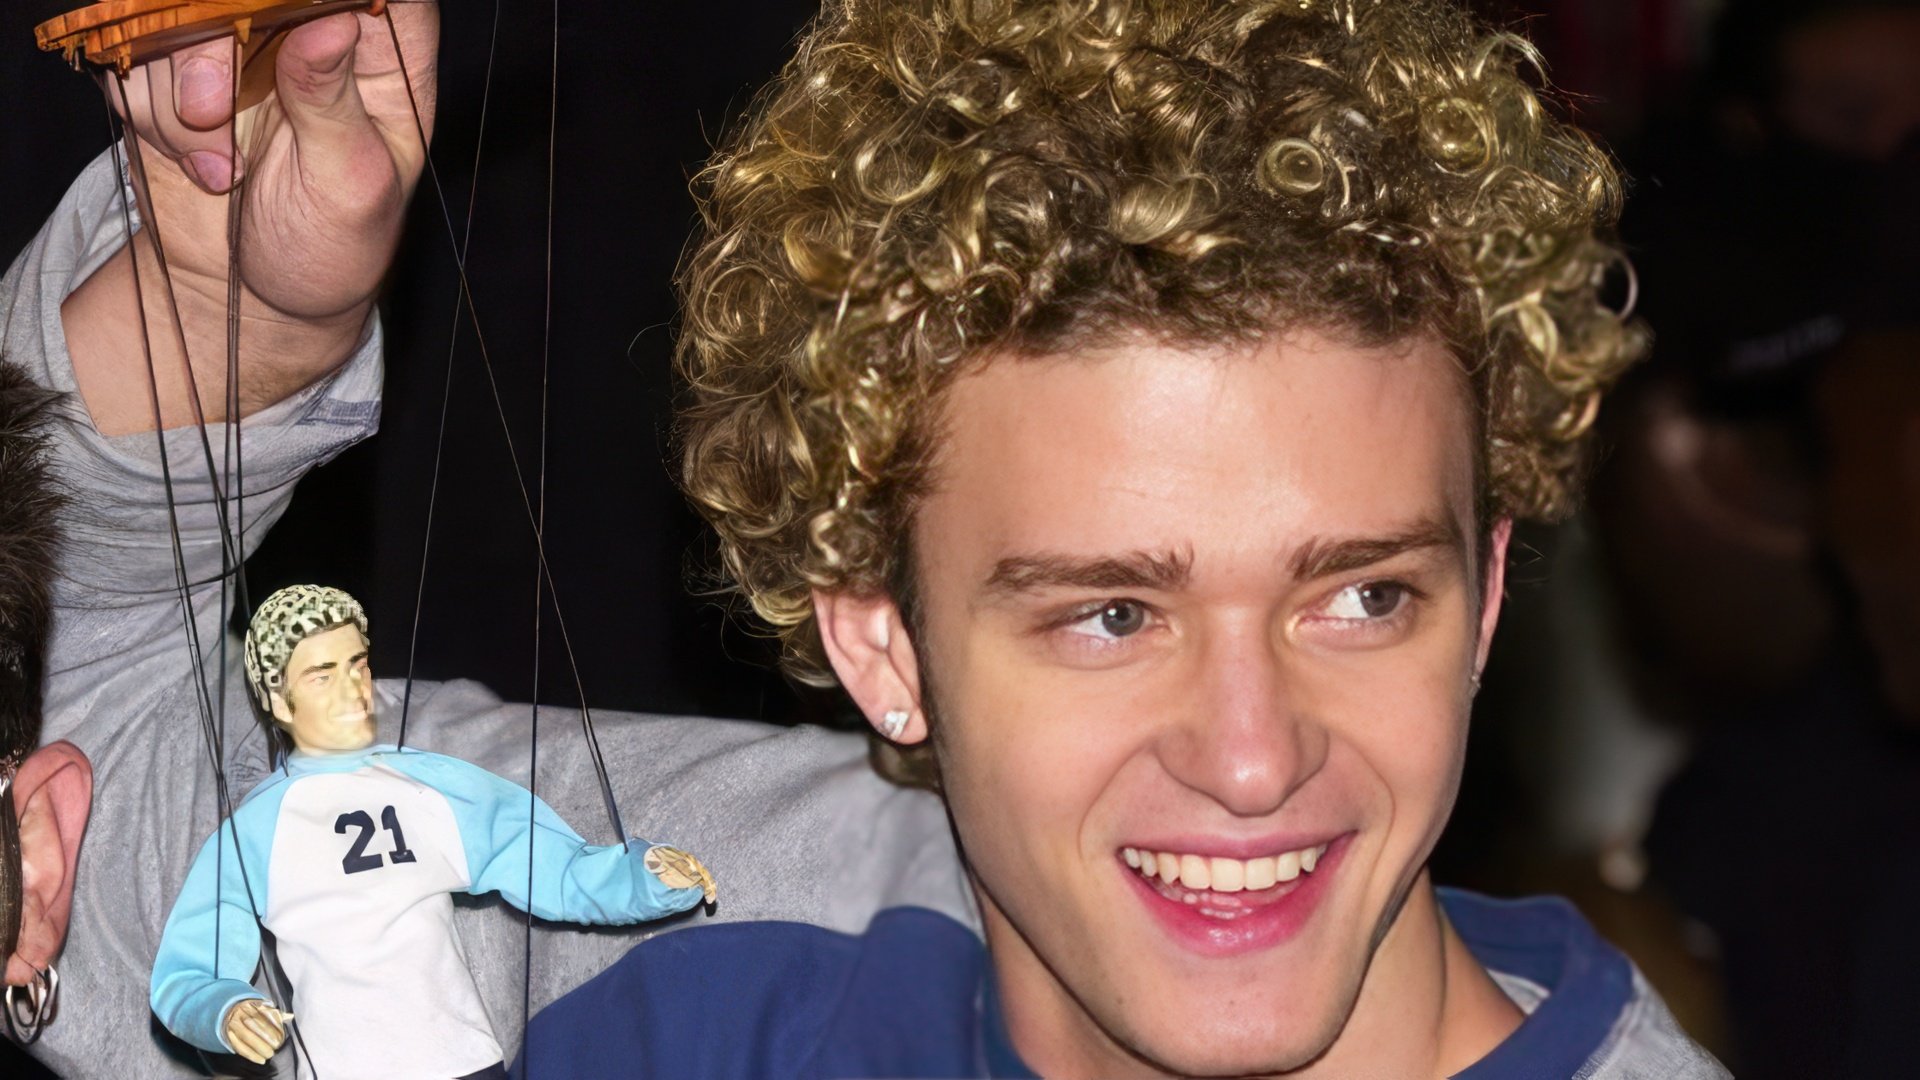 Justin Timberlake was a member of a popular boy band